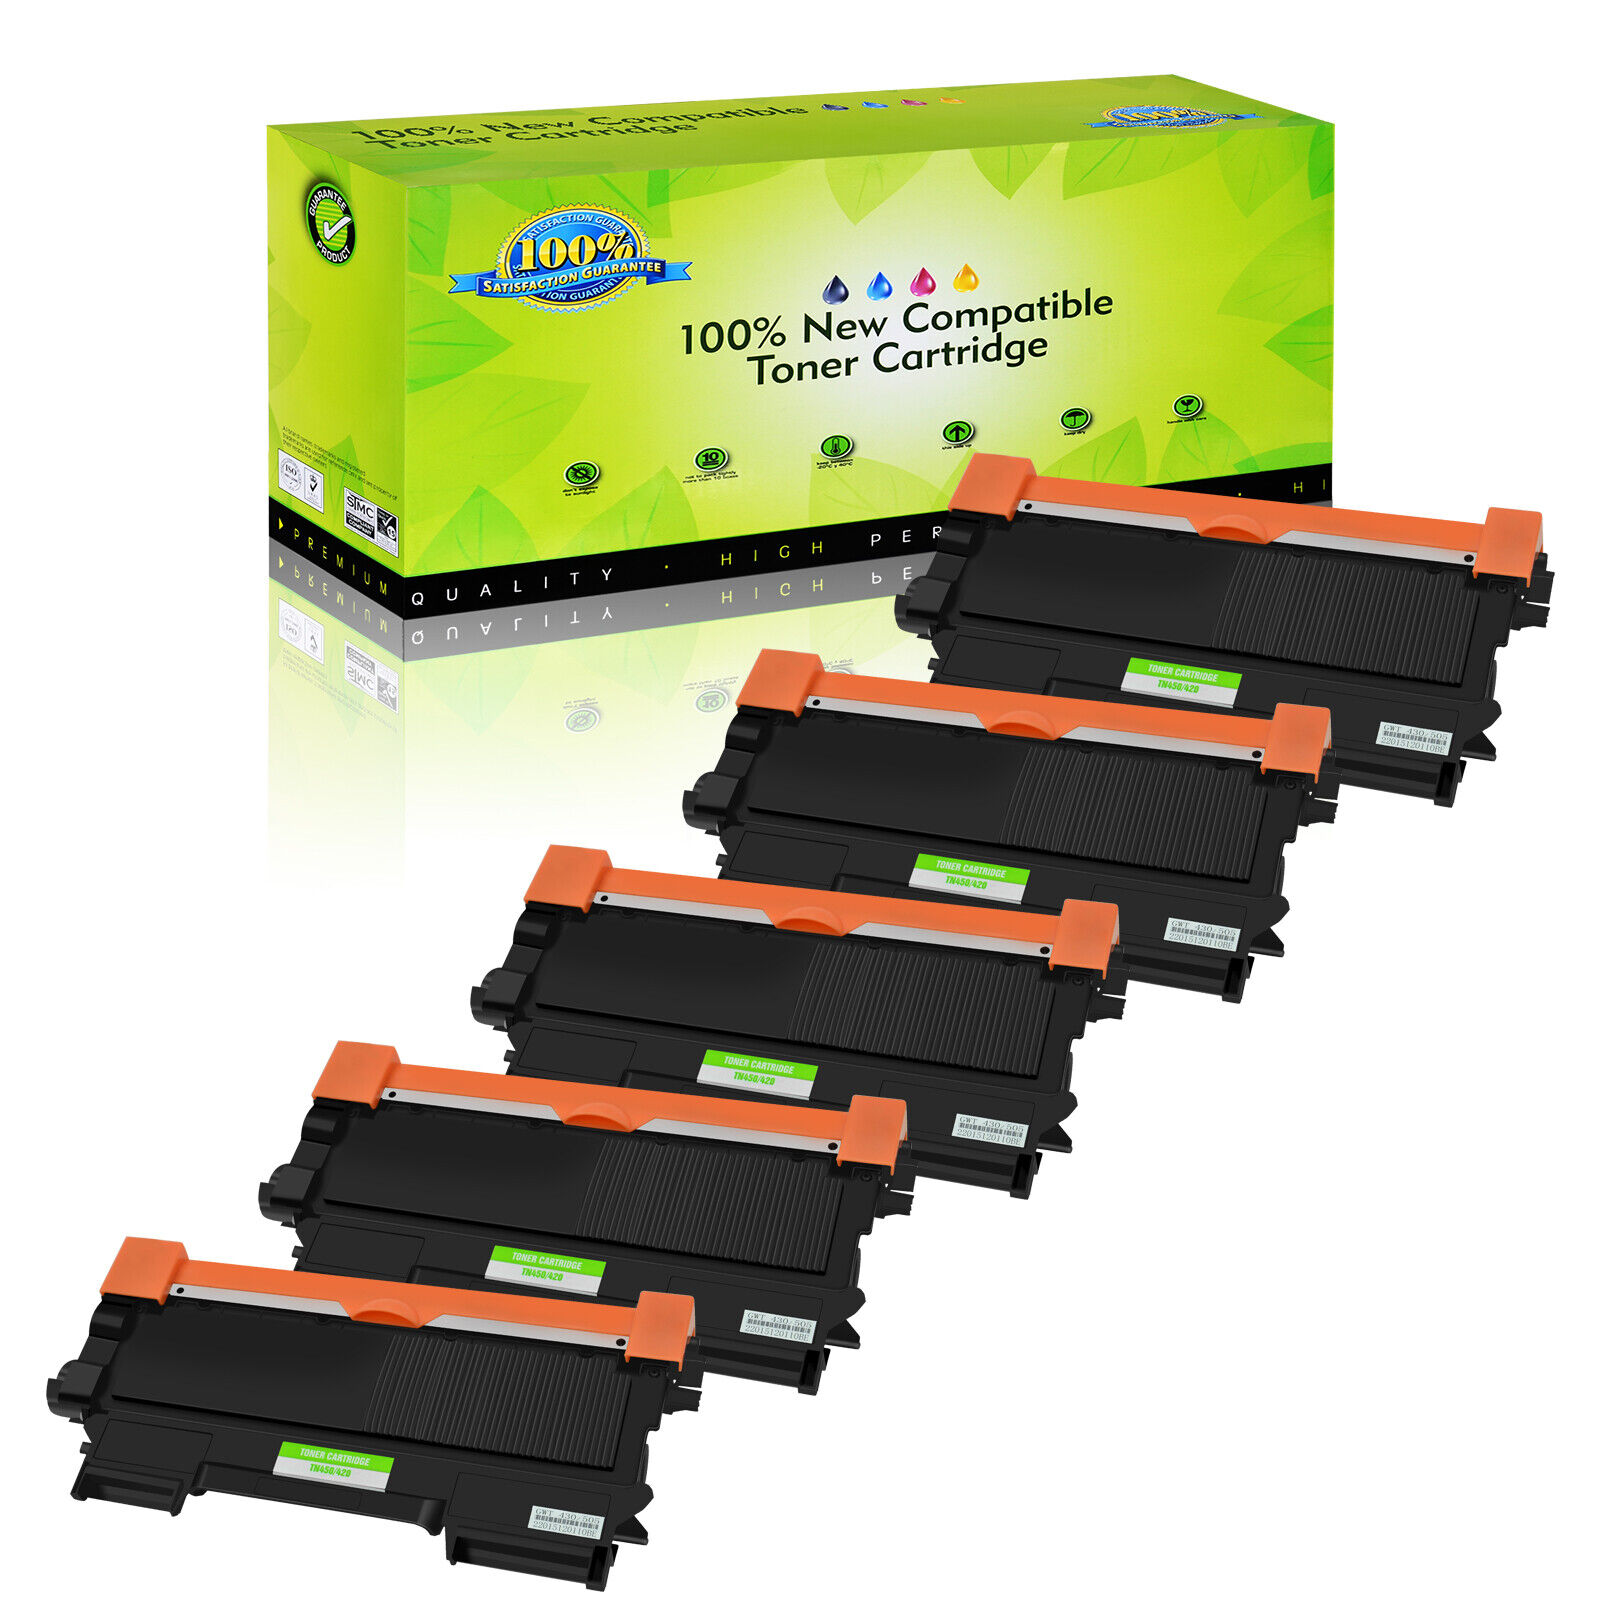 5x TN450 Toner Cartridge For Brother MFC-7240 7360 7360NR 7460 7470 7860 7860DWR